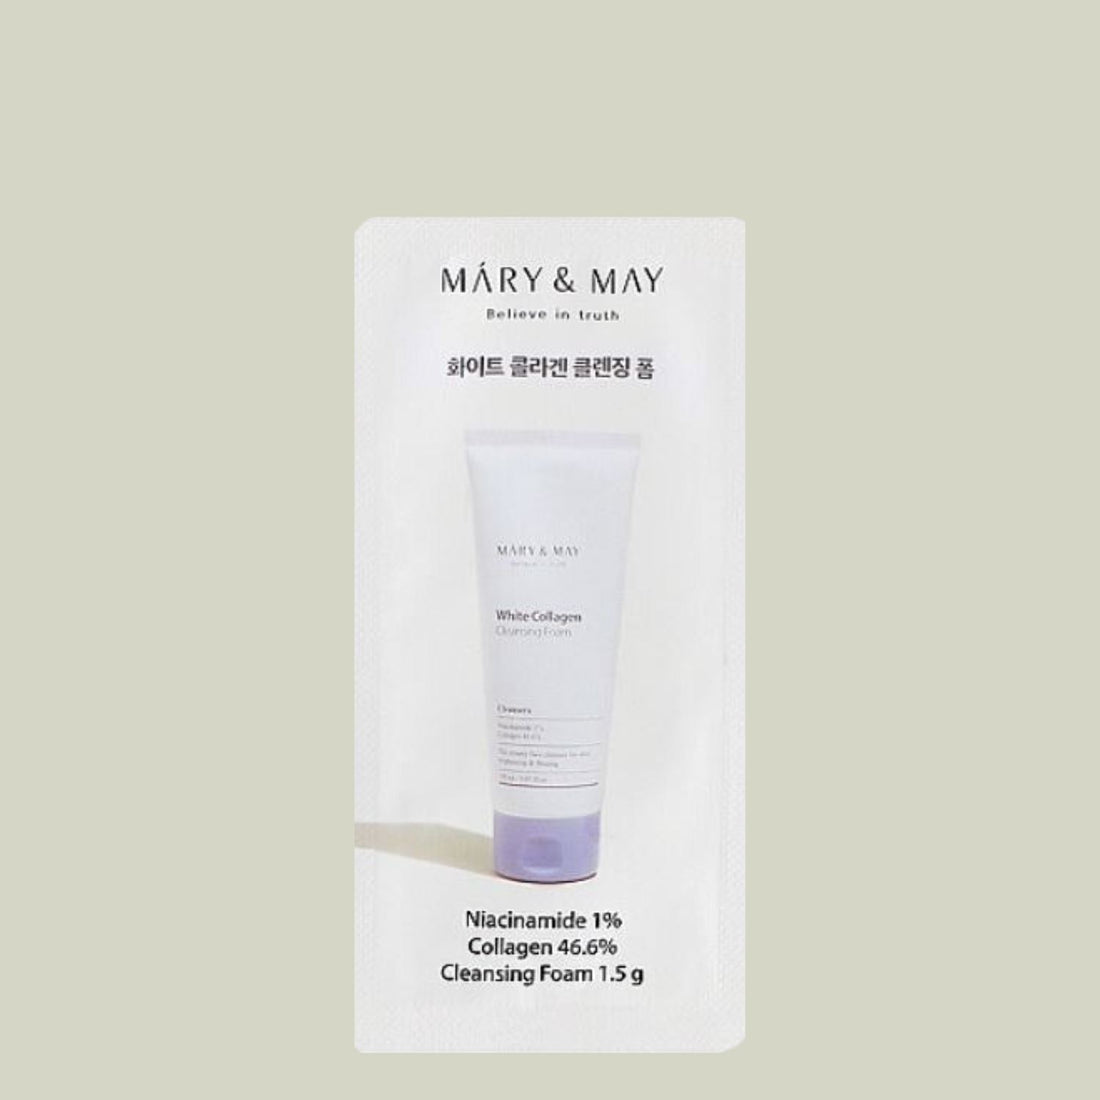 Mary&amp;May White Collagen Cleansing Foam ( Sample Pouch ) 1.5ml Skin Care Mary&amp;May ORION XO Sri Lanka